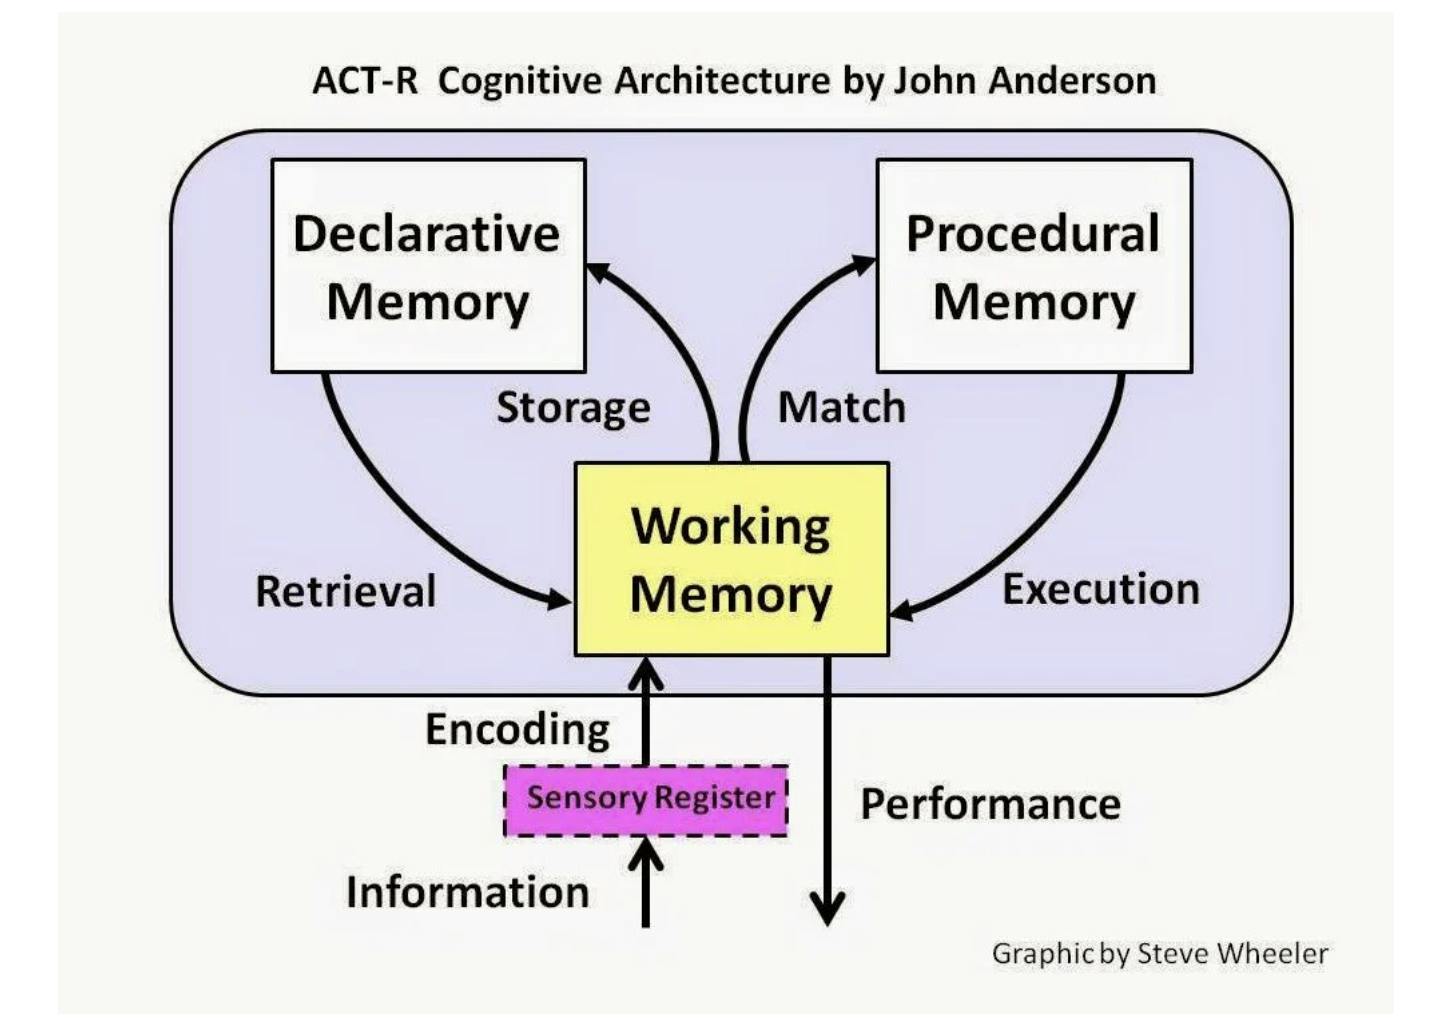 Cognitive Architecture by John Anderson